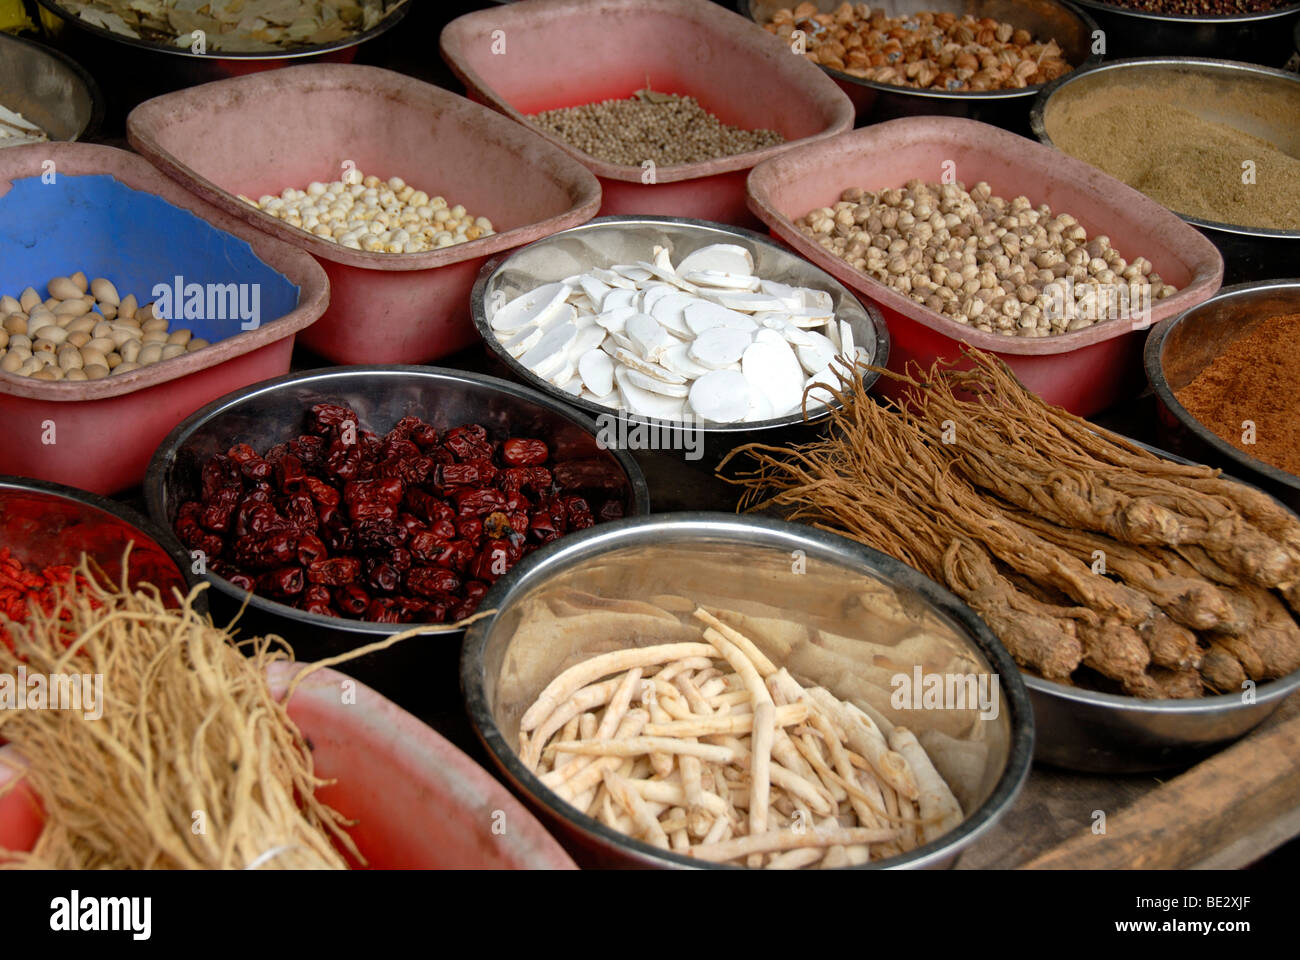 Market, produce for sale at a market stand, display, Chinese herbs and roots, Lijiang, Yunnan Province, People's Republic of Ch Stock Photo